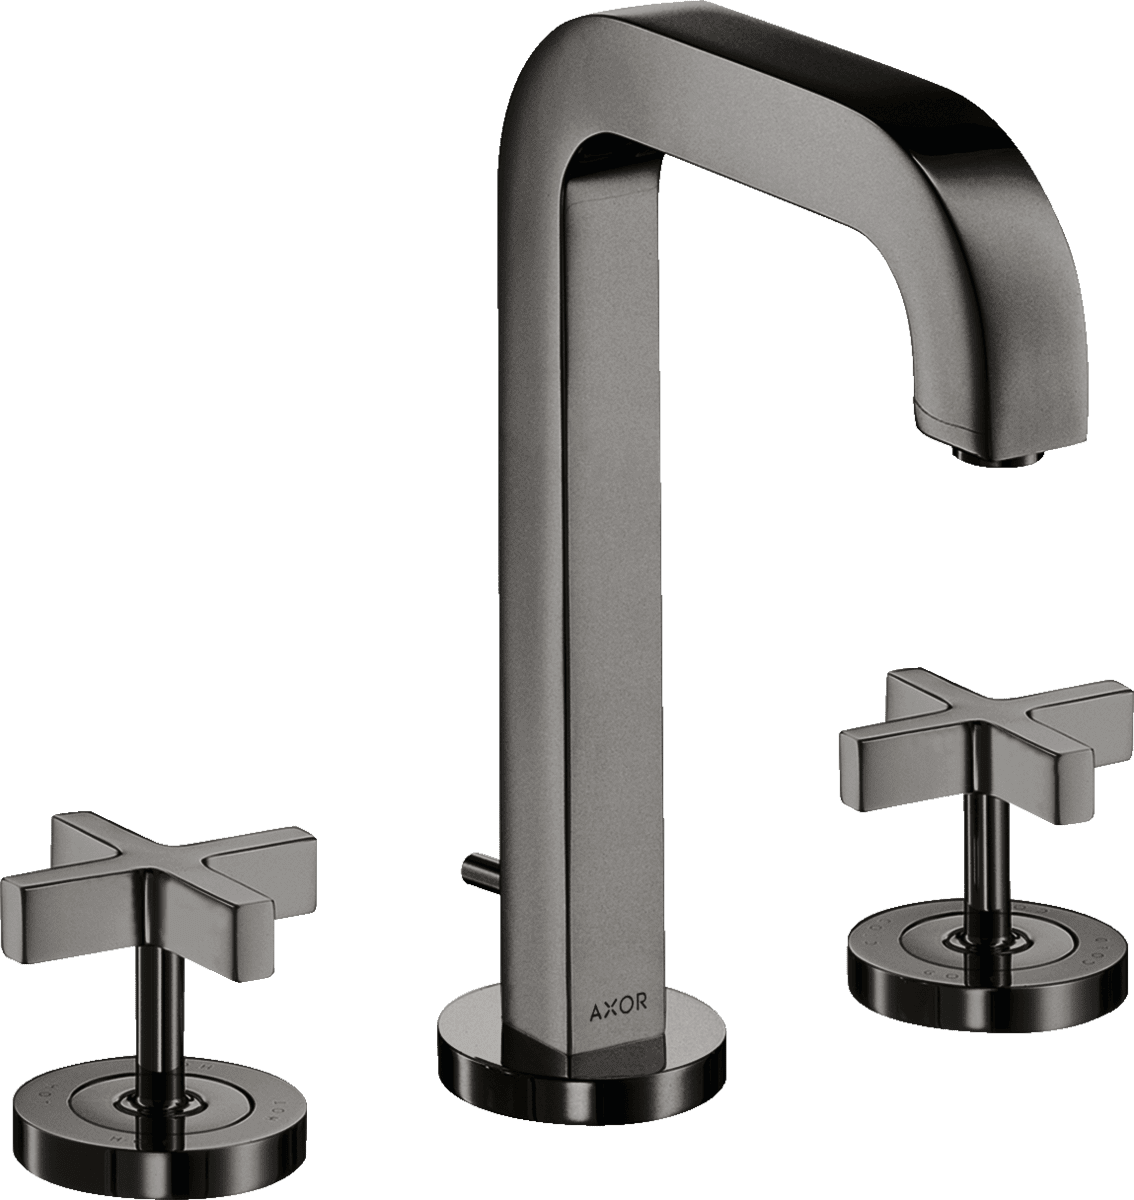 Picture of HANSGROHE AXOR Citterio 3-hole basin mixer 170 with spout 140 mm, cross handles, escutcheons and pop-up waste set #39133330 - Polished Black Chrome